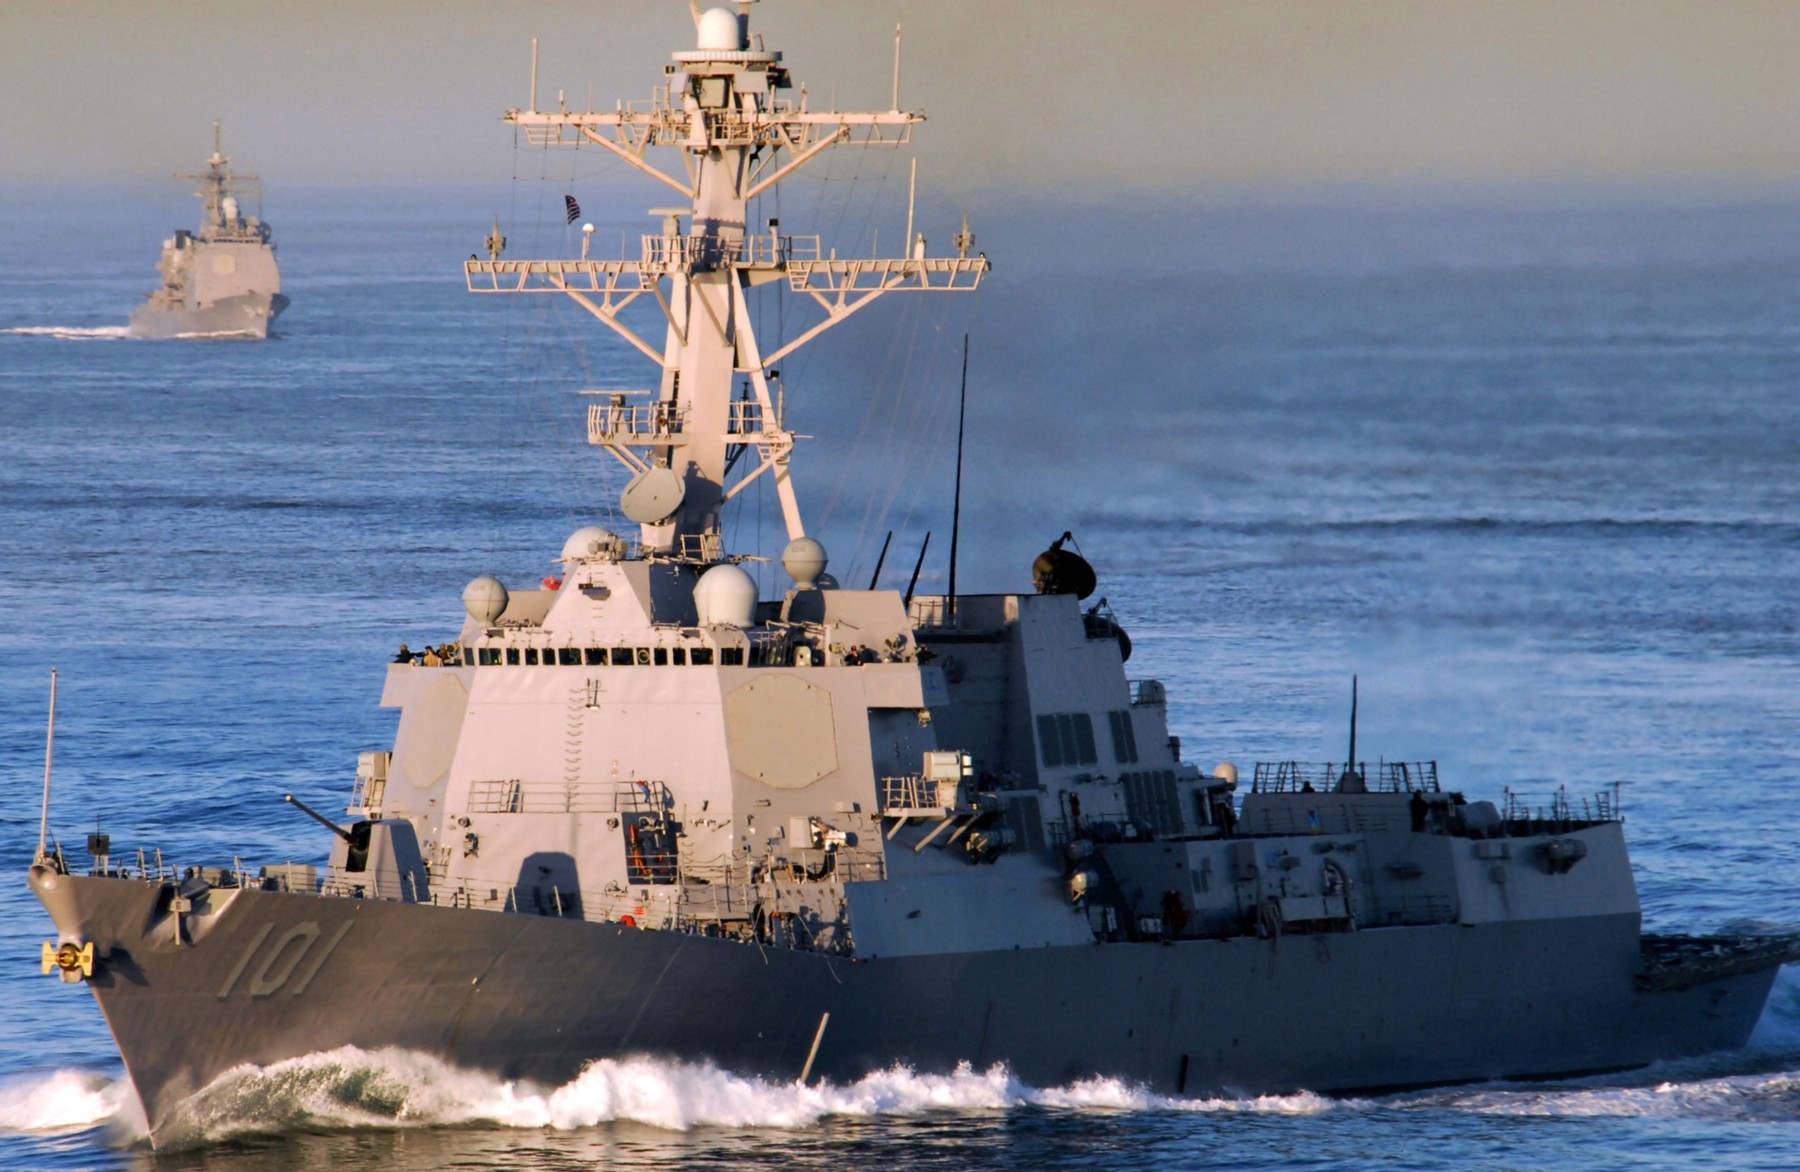 ddg-101 uss gridley arleigh burke class guided missile destroyer aegis us navy 43